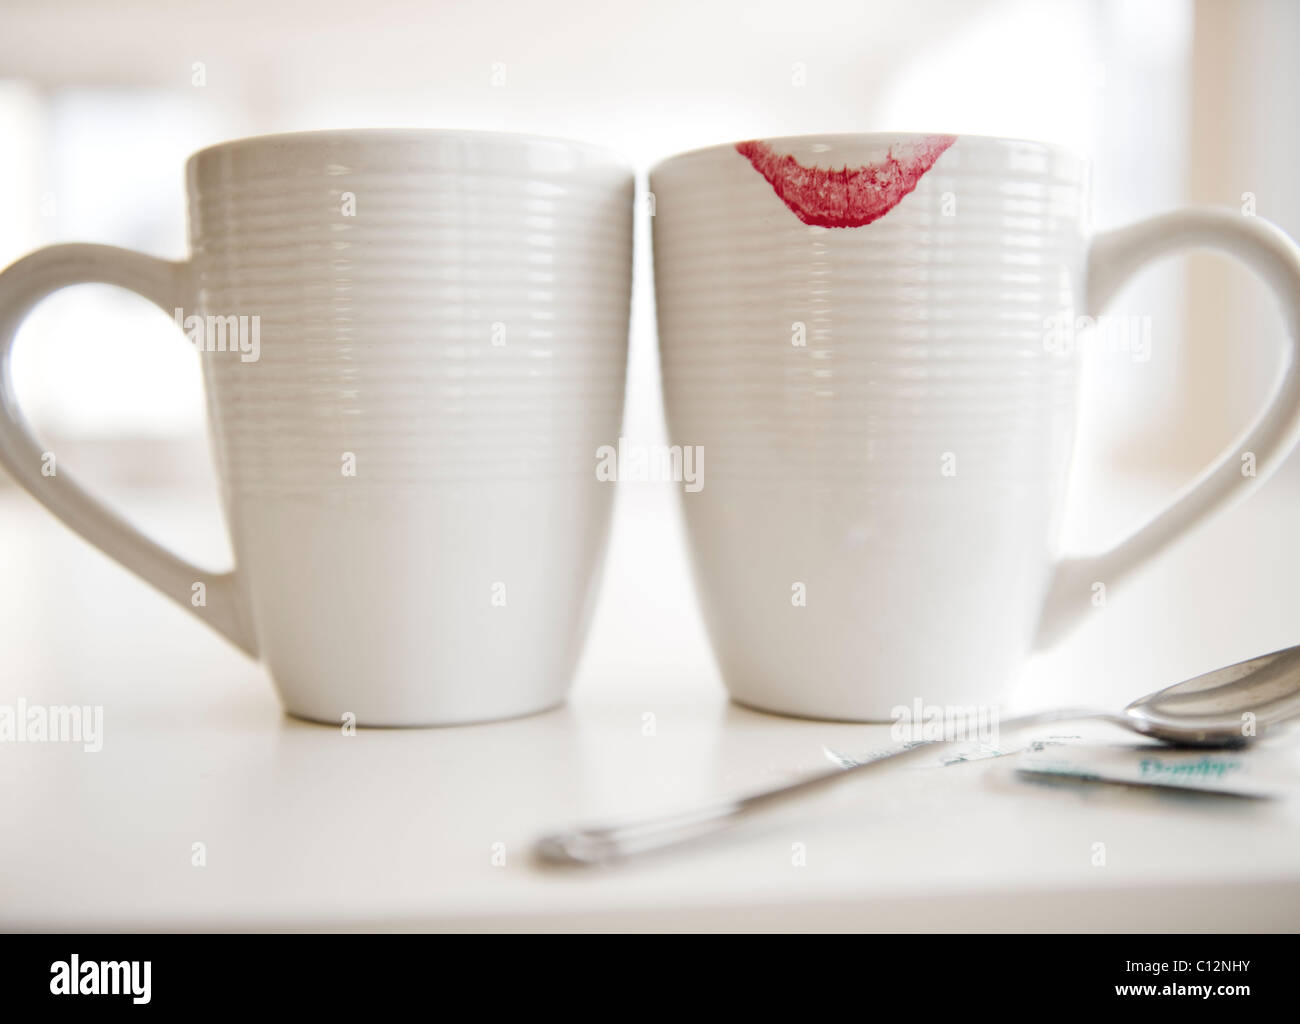 USA, New Jersey, Jersey City, close up of coffee mugs, one with red lipstick sign on edge Stock Photo